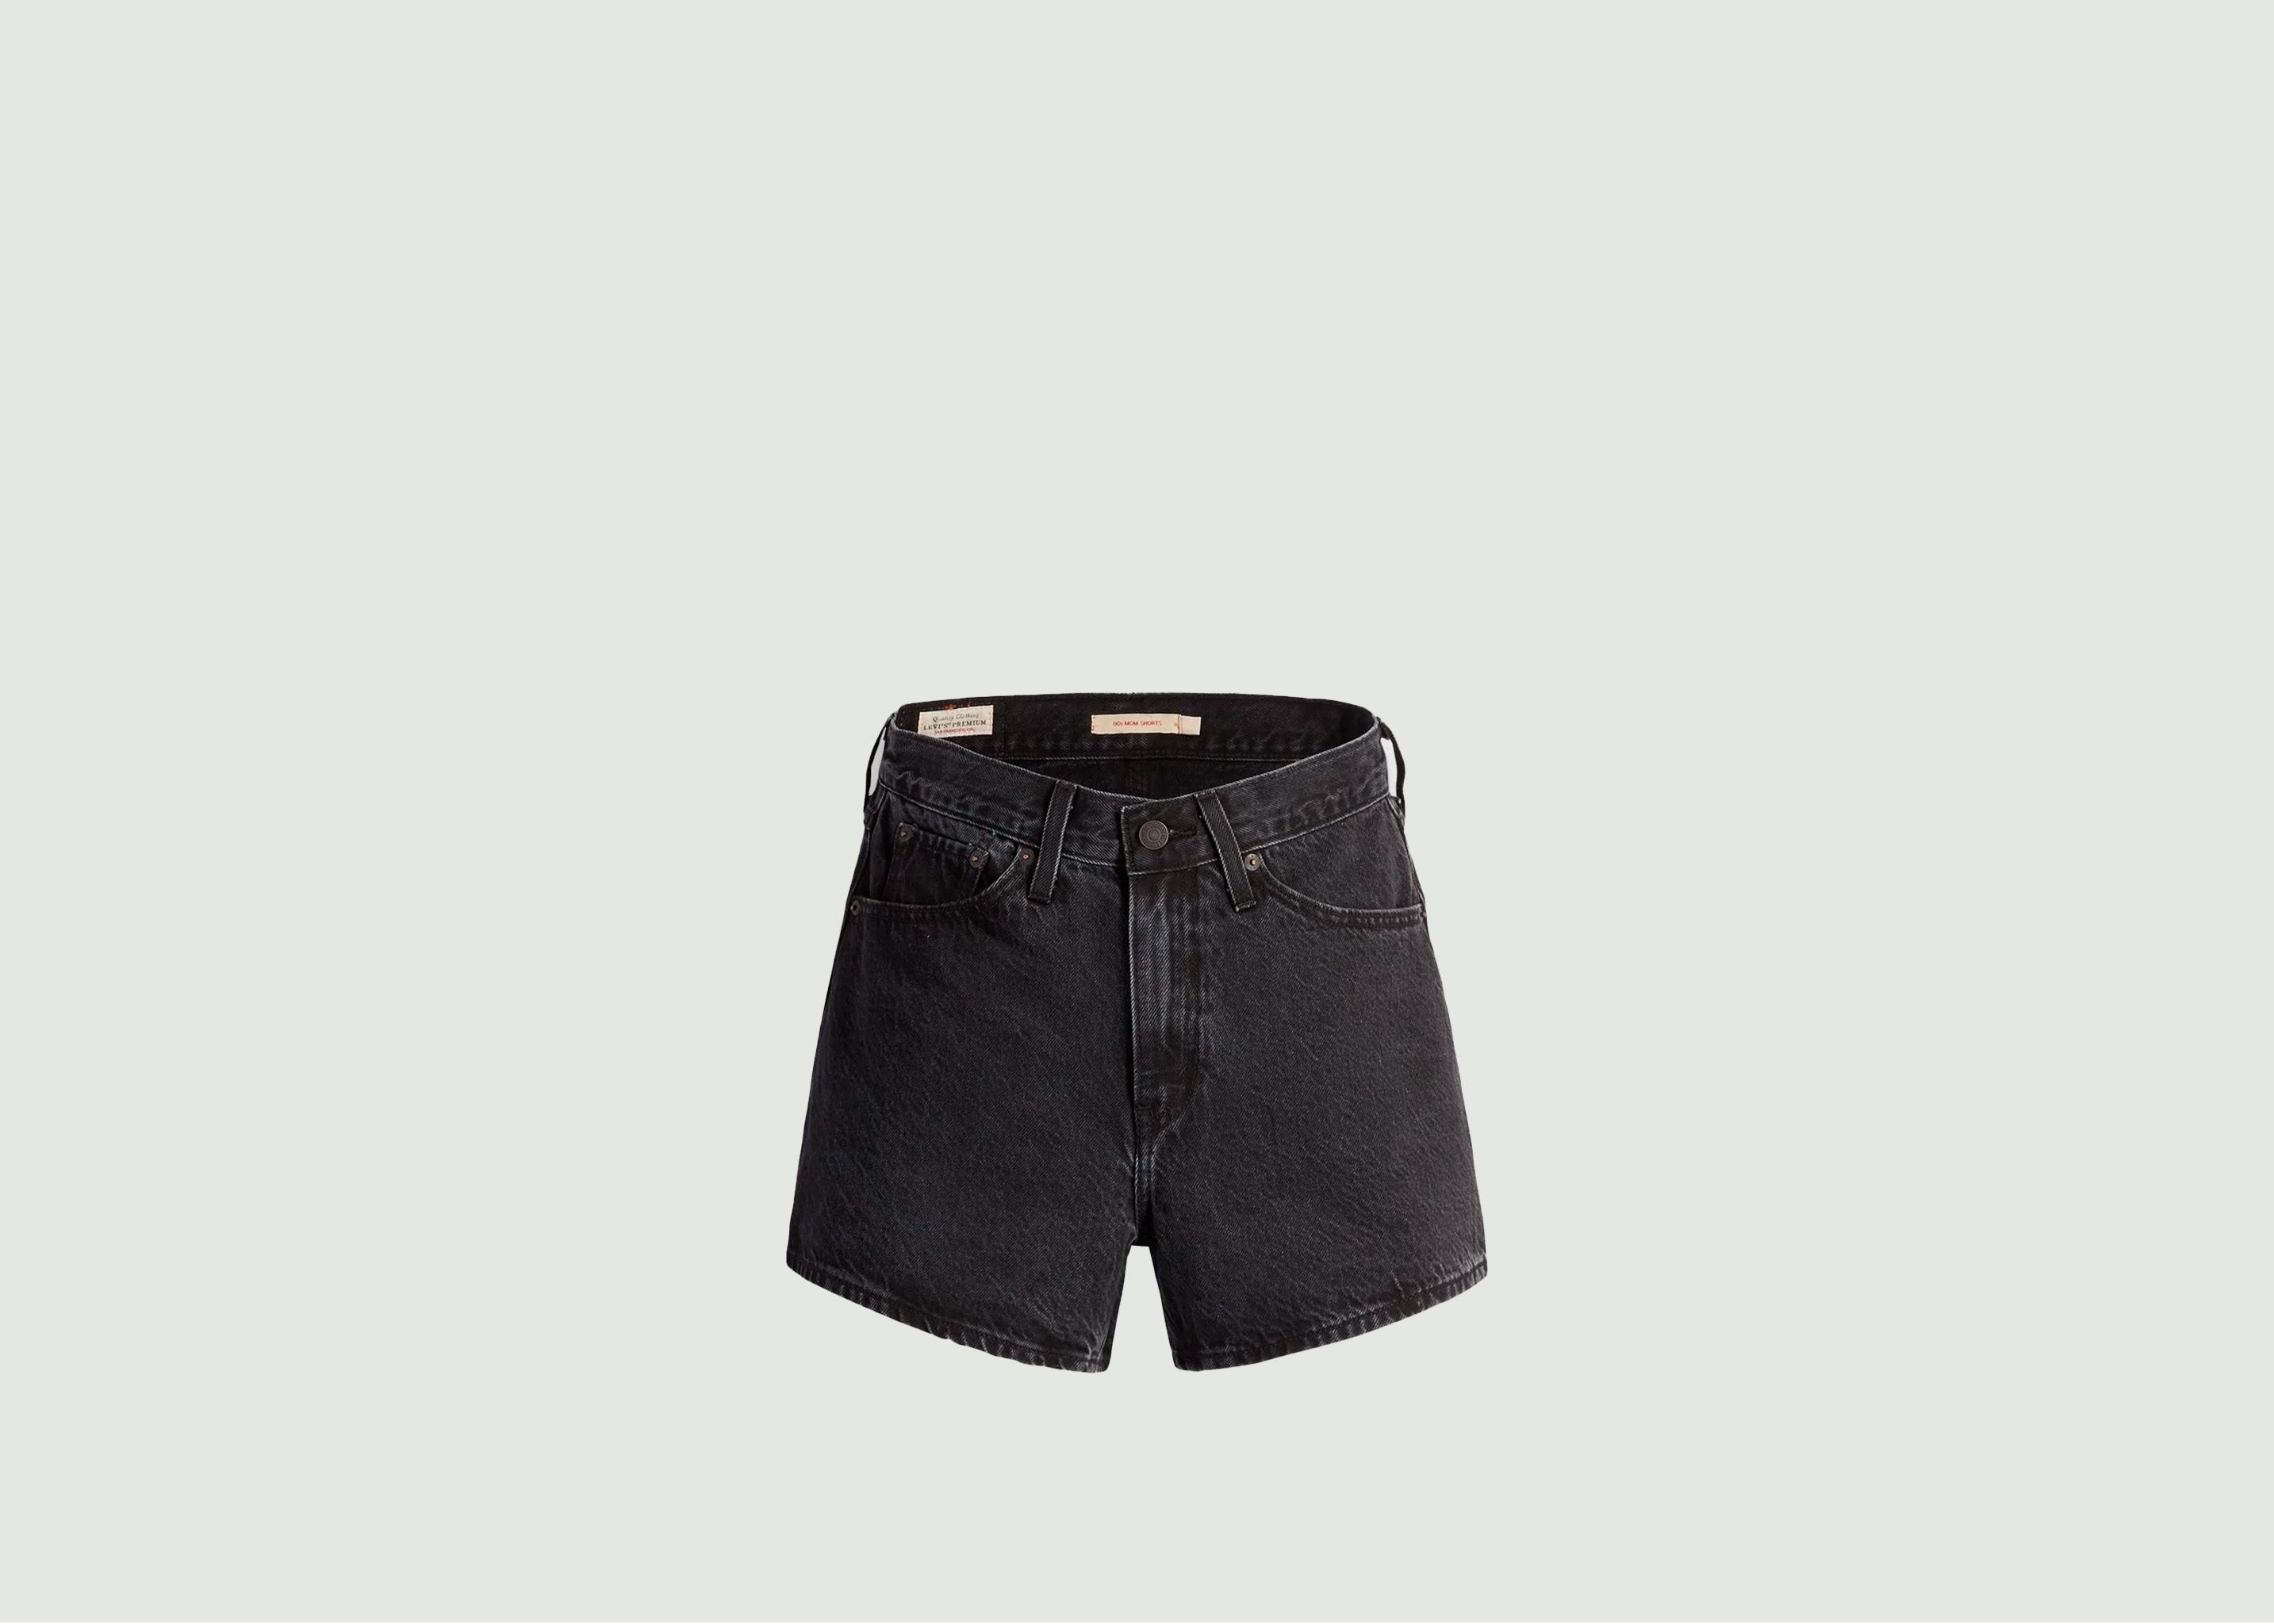 Shorts Mom 80's - Levi's Red Tab